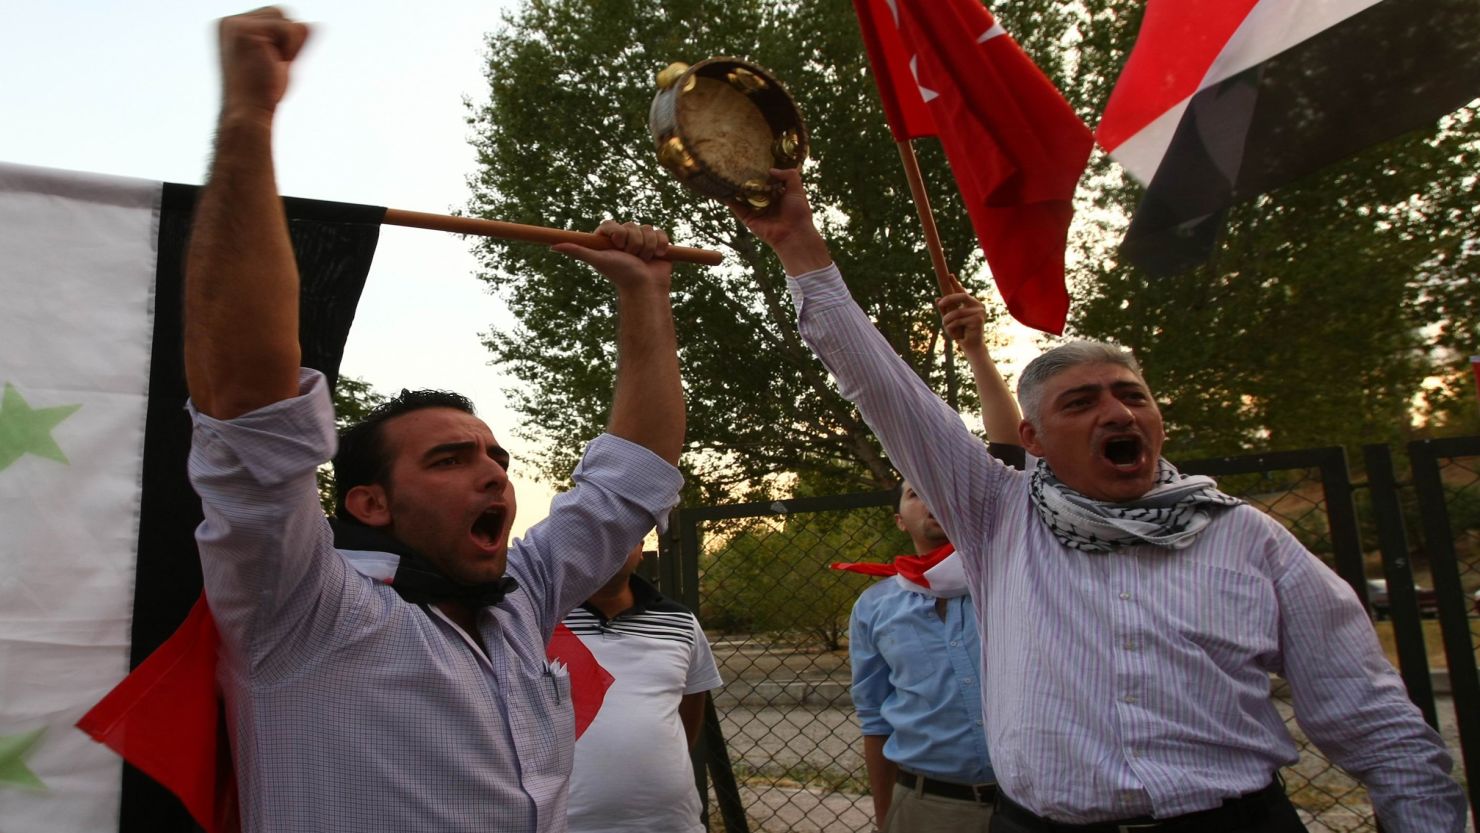 Members of the Syrian opposition living in Turkey  protest against the Syrian regime in Ankara on September 19, 2011.